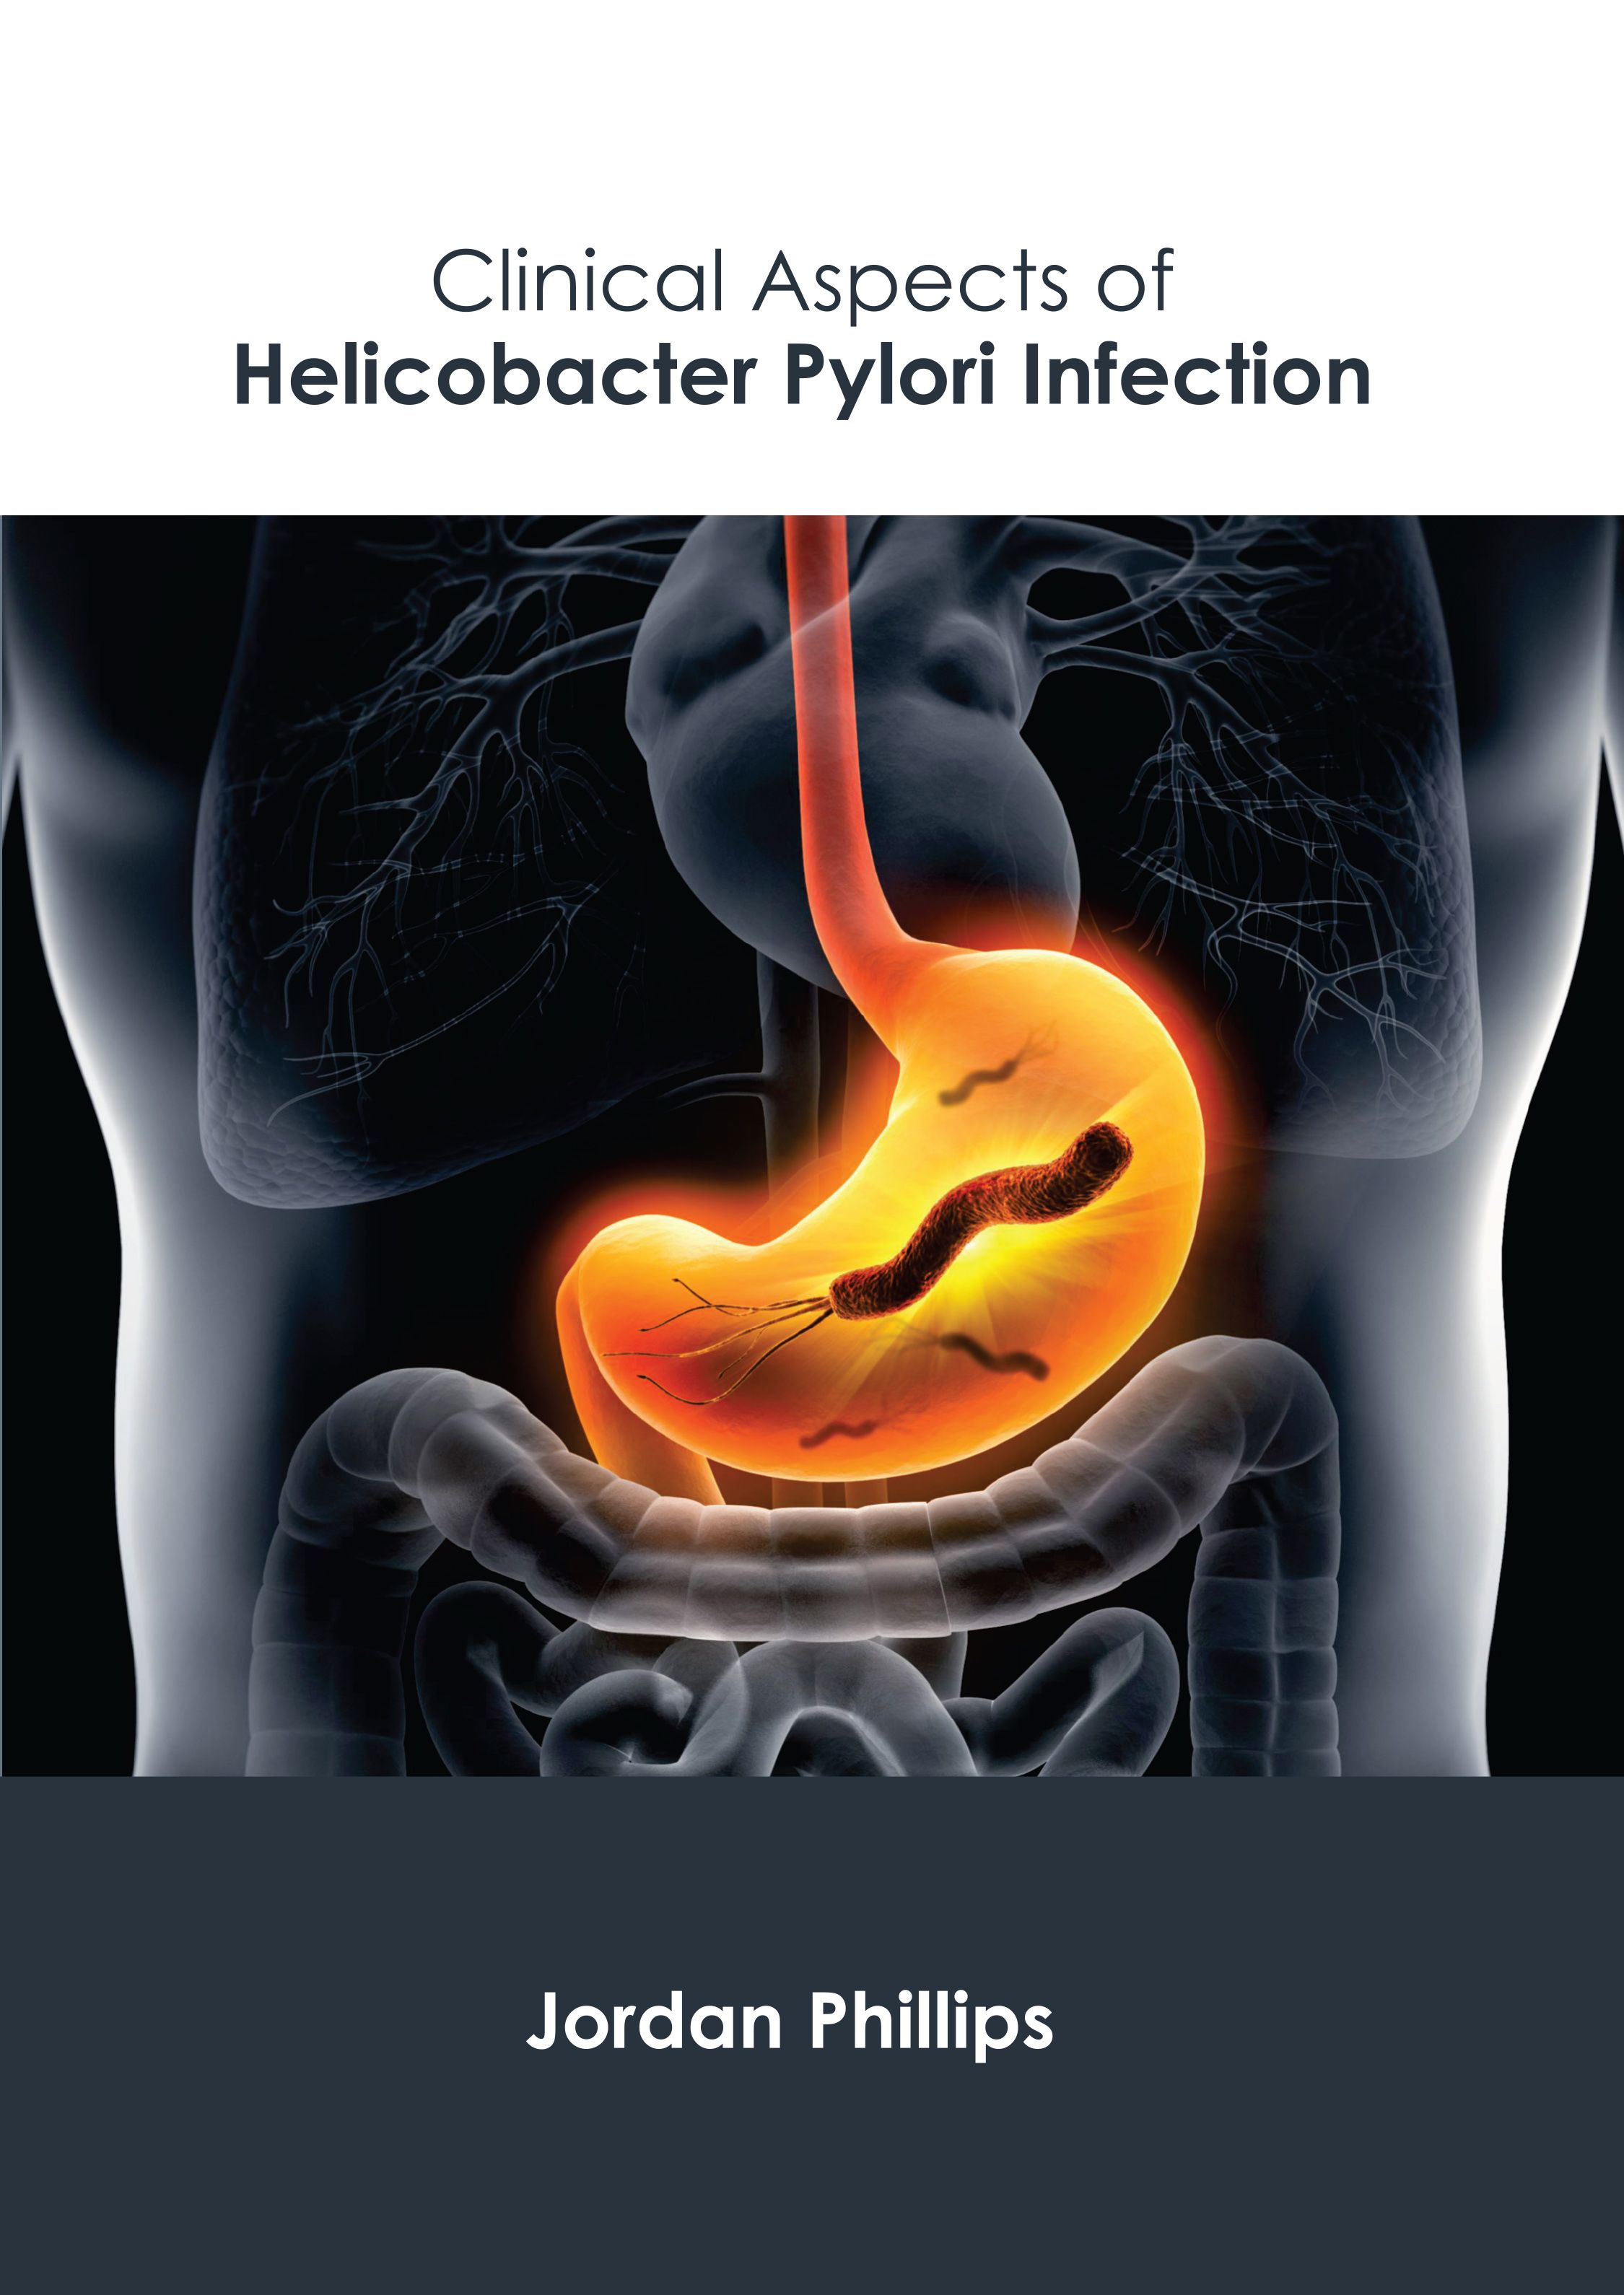 CLINICAL ASPECTS OF HELICOBACTER PYLORI INFECTION